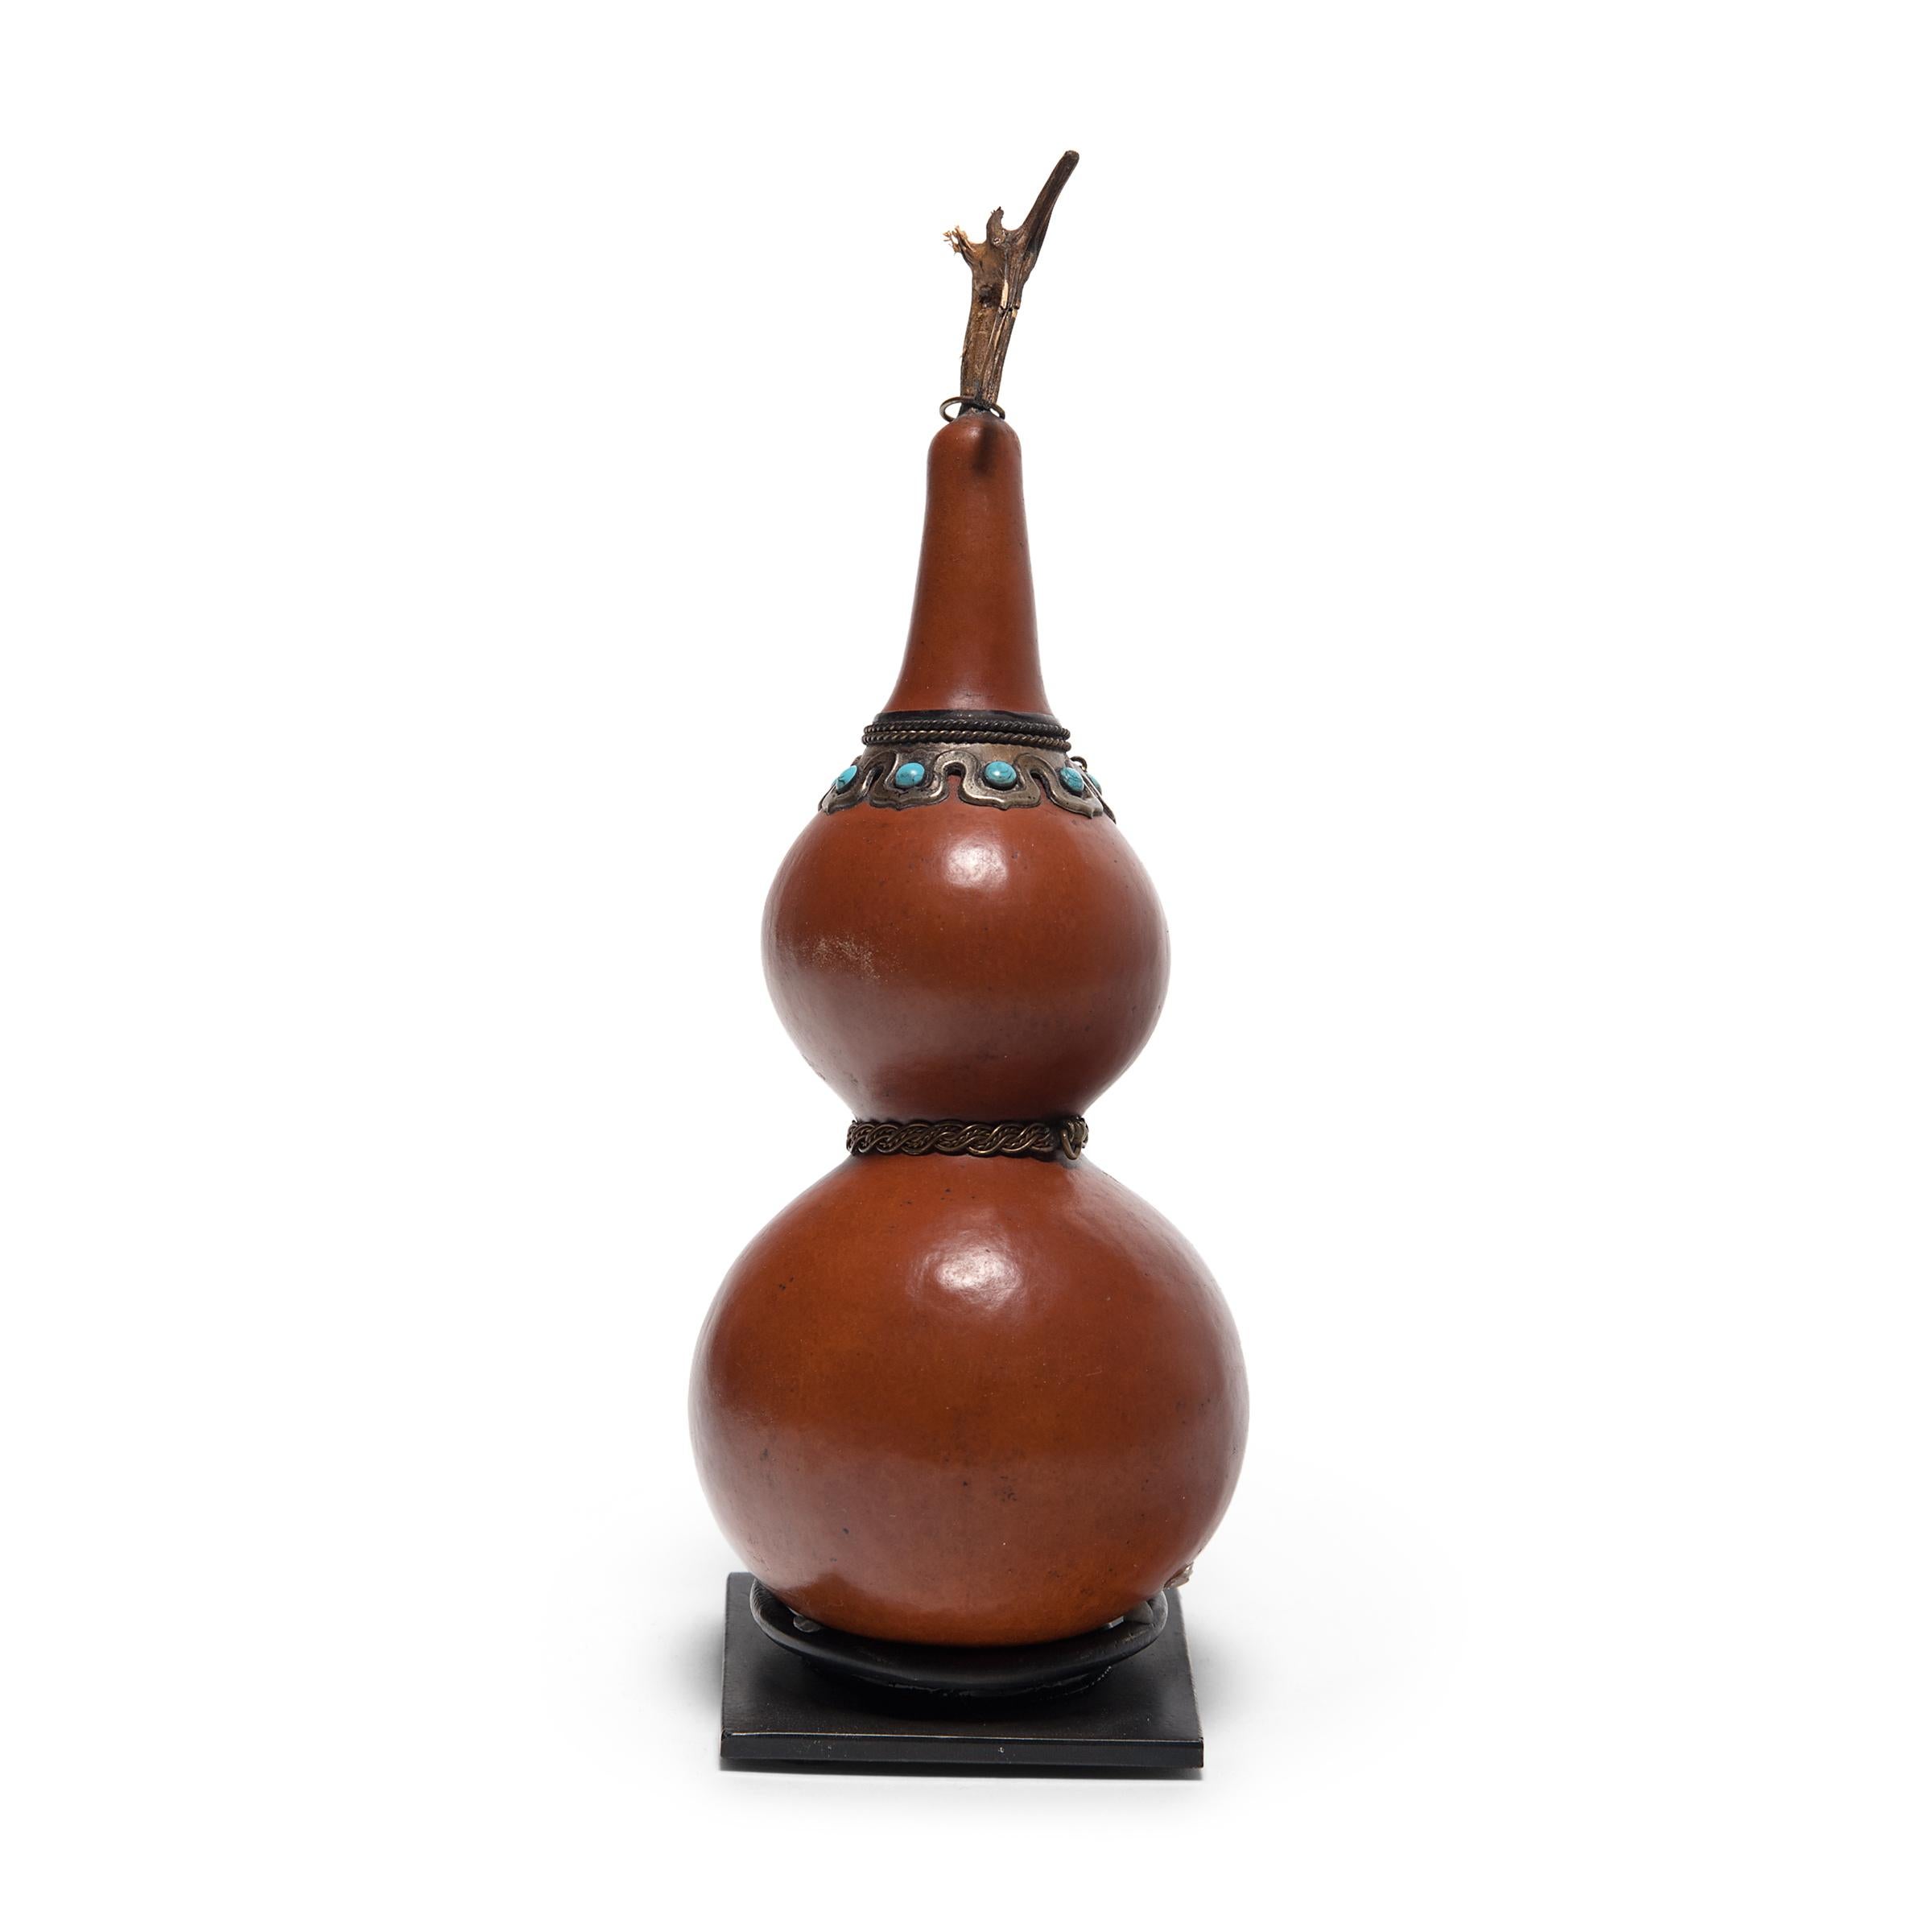 Due to their many seeds, gourds are appreciated in China and Tibet as auspicious symbols of fertility. When dried, gourds became durable natural vessels used as ladles, flasks, or even as musical instruments. This Tibetan flask is made of such a